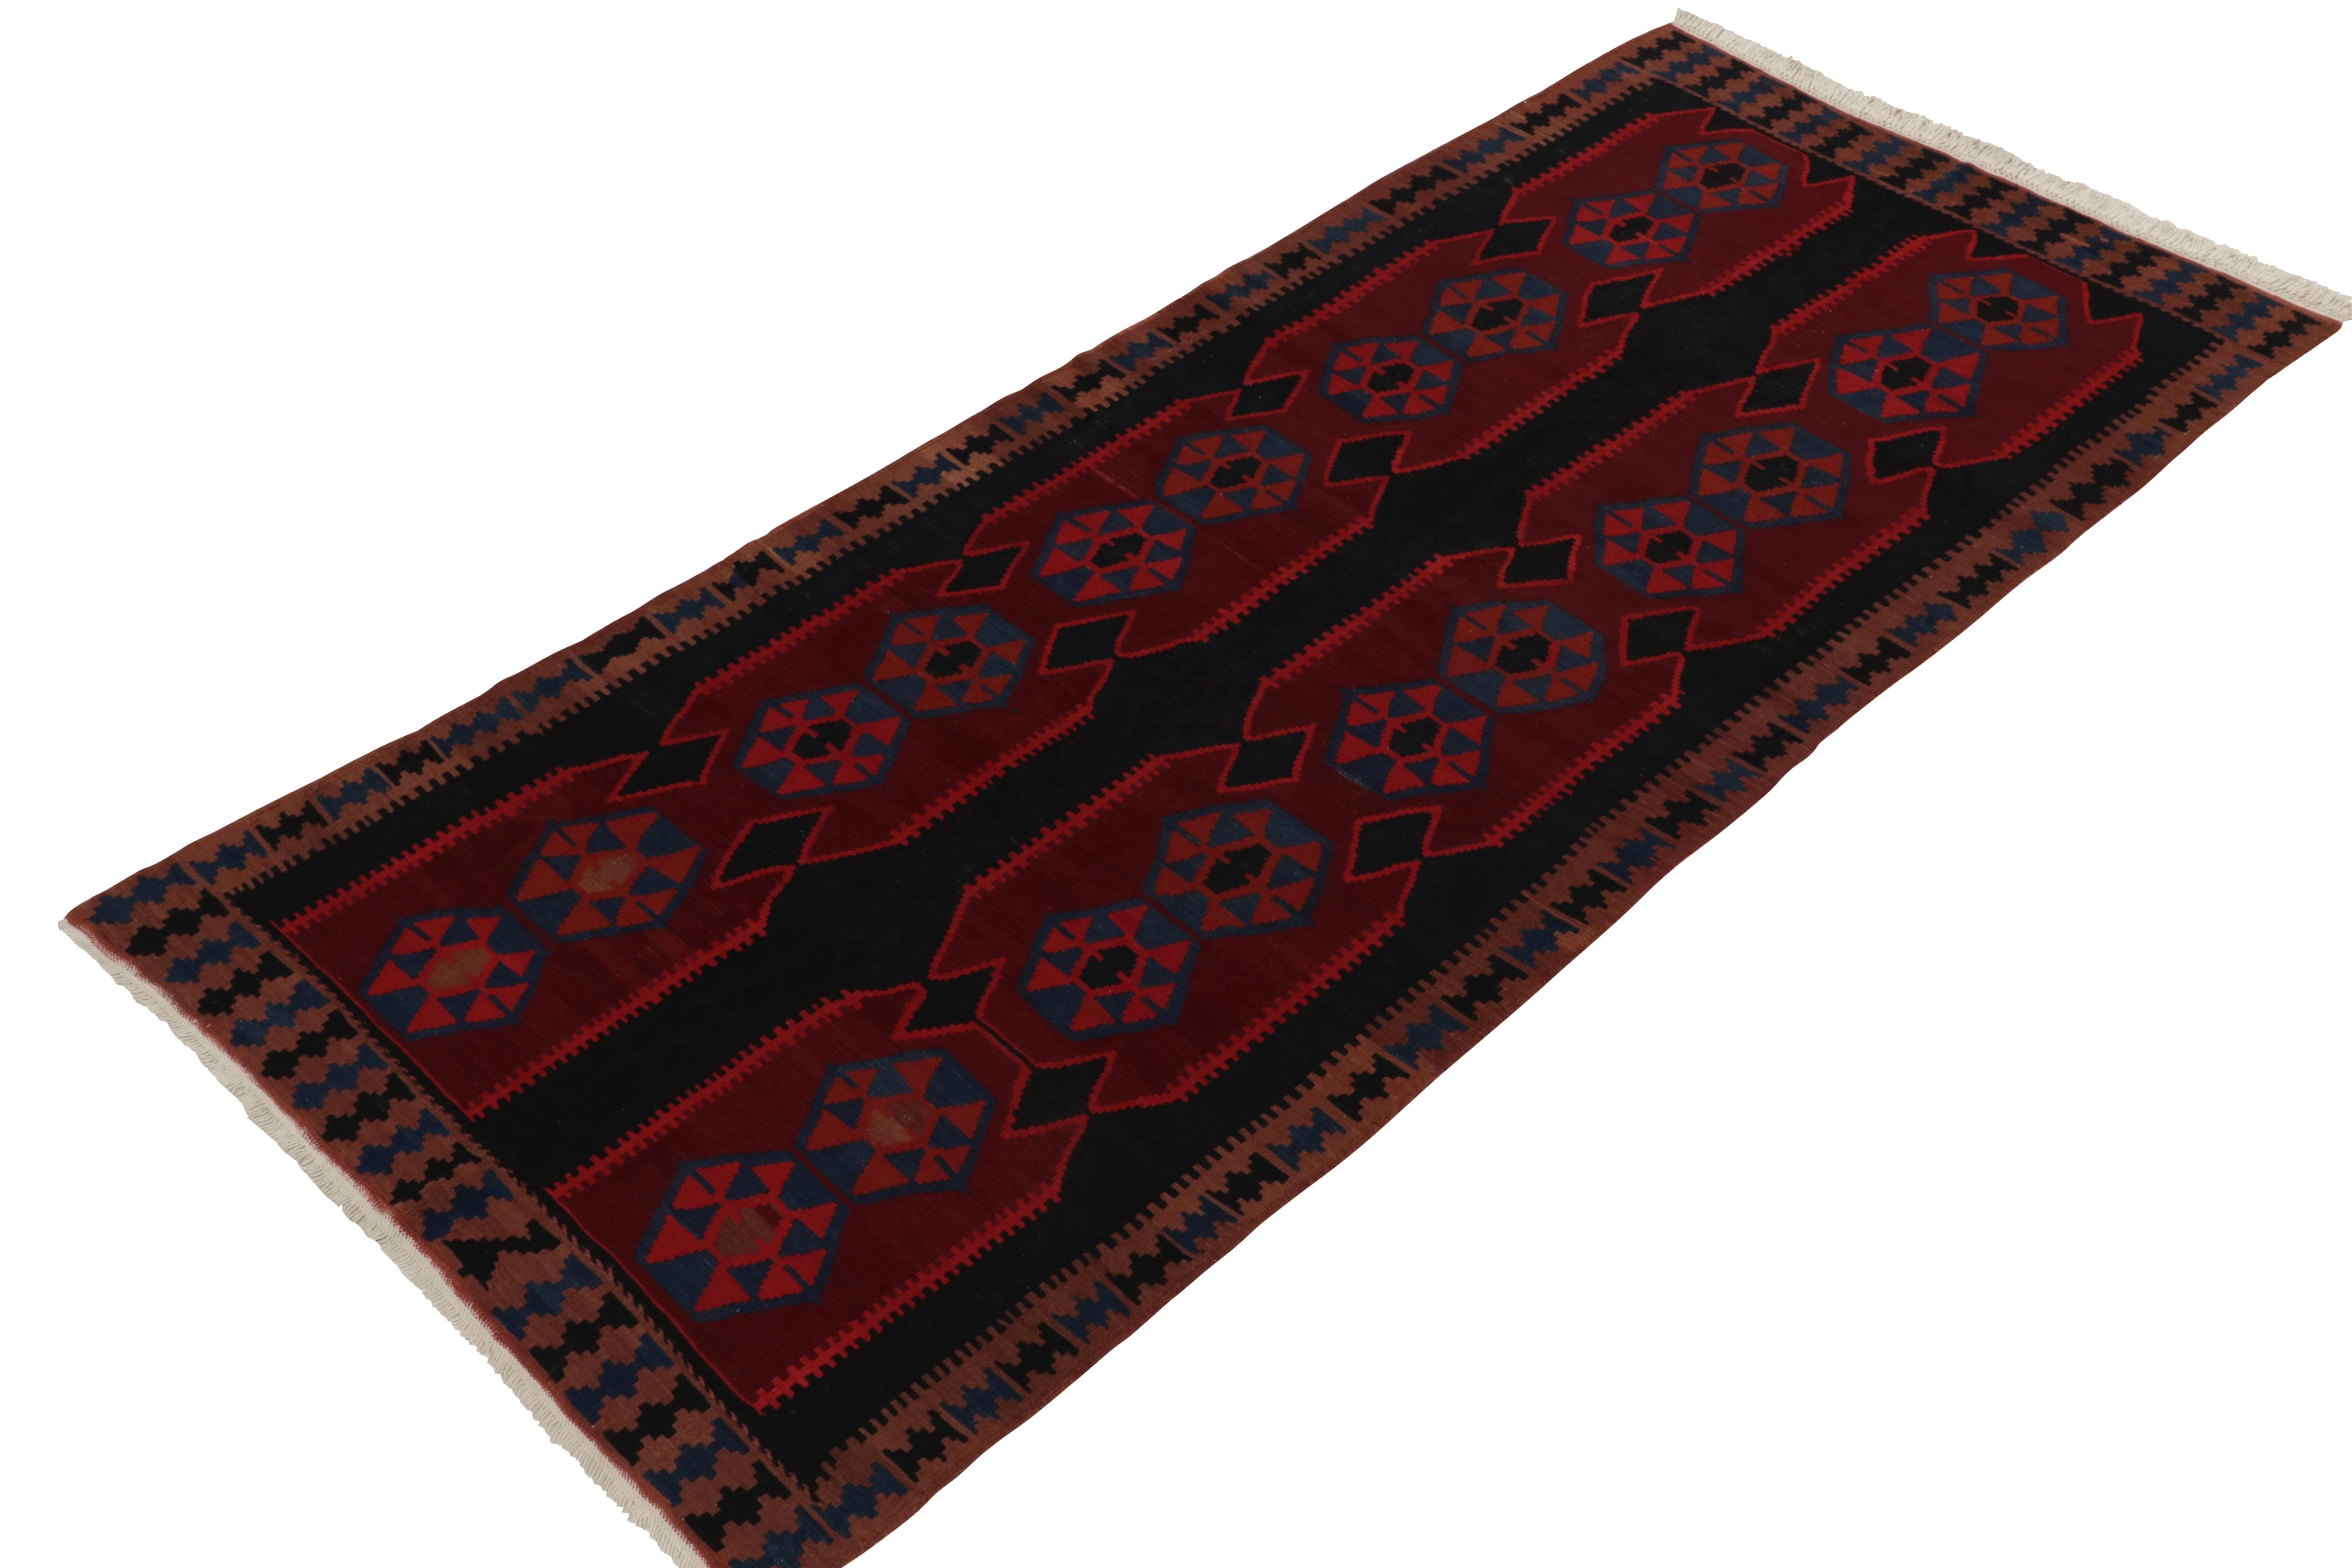 Handwoven in wool from Persia circa 1950-1960, a vintage Ghazvin kilim rug boasting an atypical design. The vision carries geometric repetition in deep reds, browns & blues with natural movement on a rare black background. Exemplifying mid century